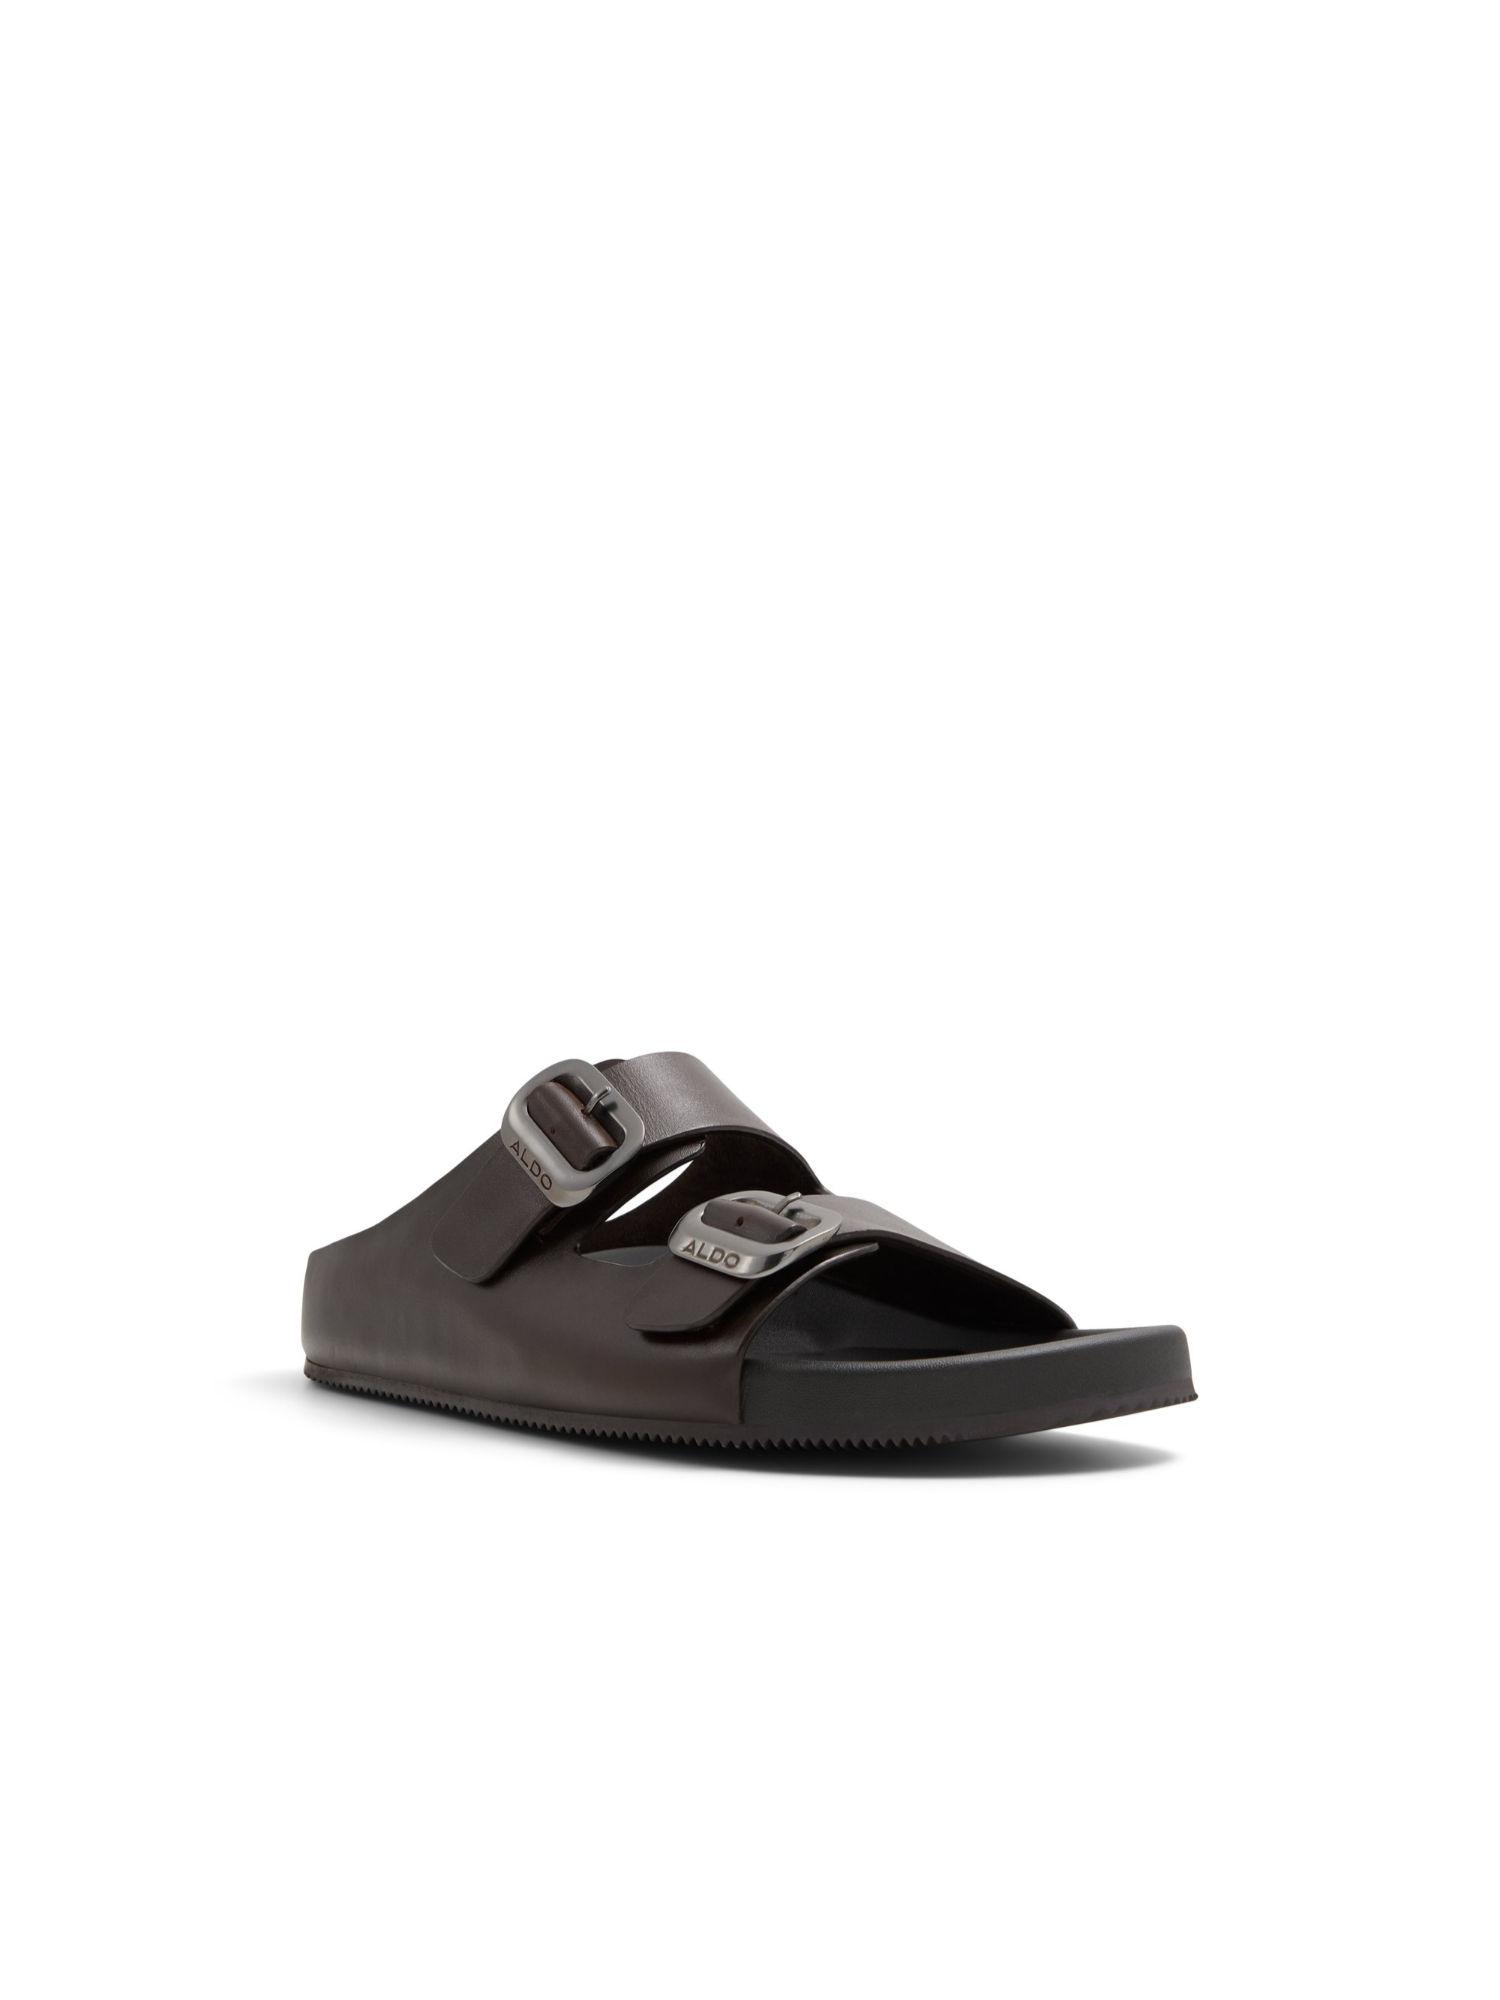 kennebunk mens brown double band sliders